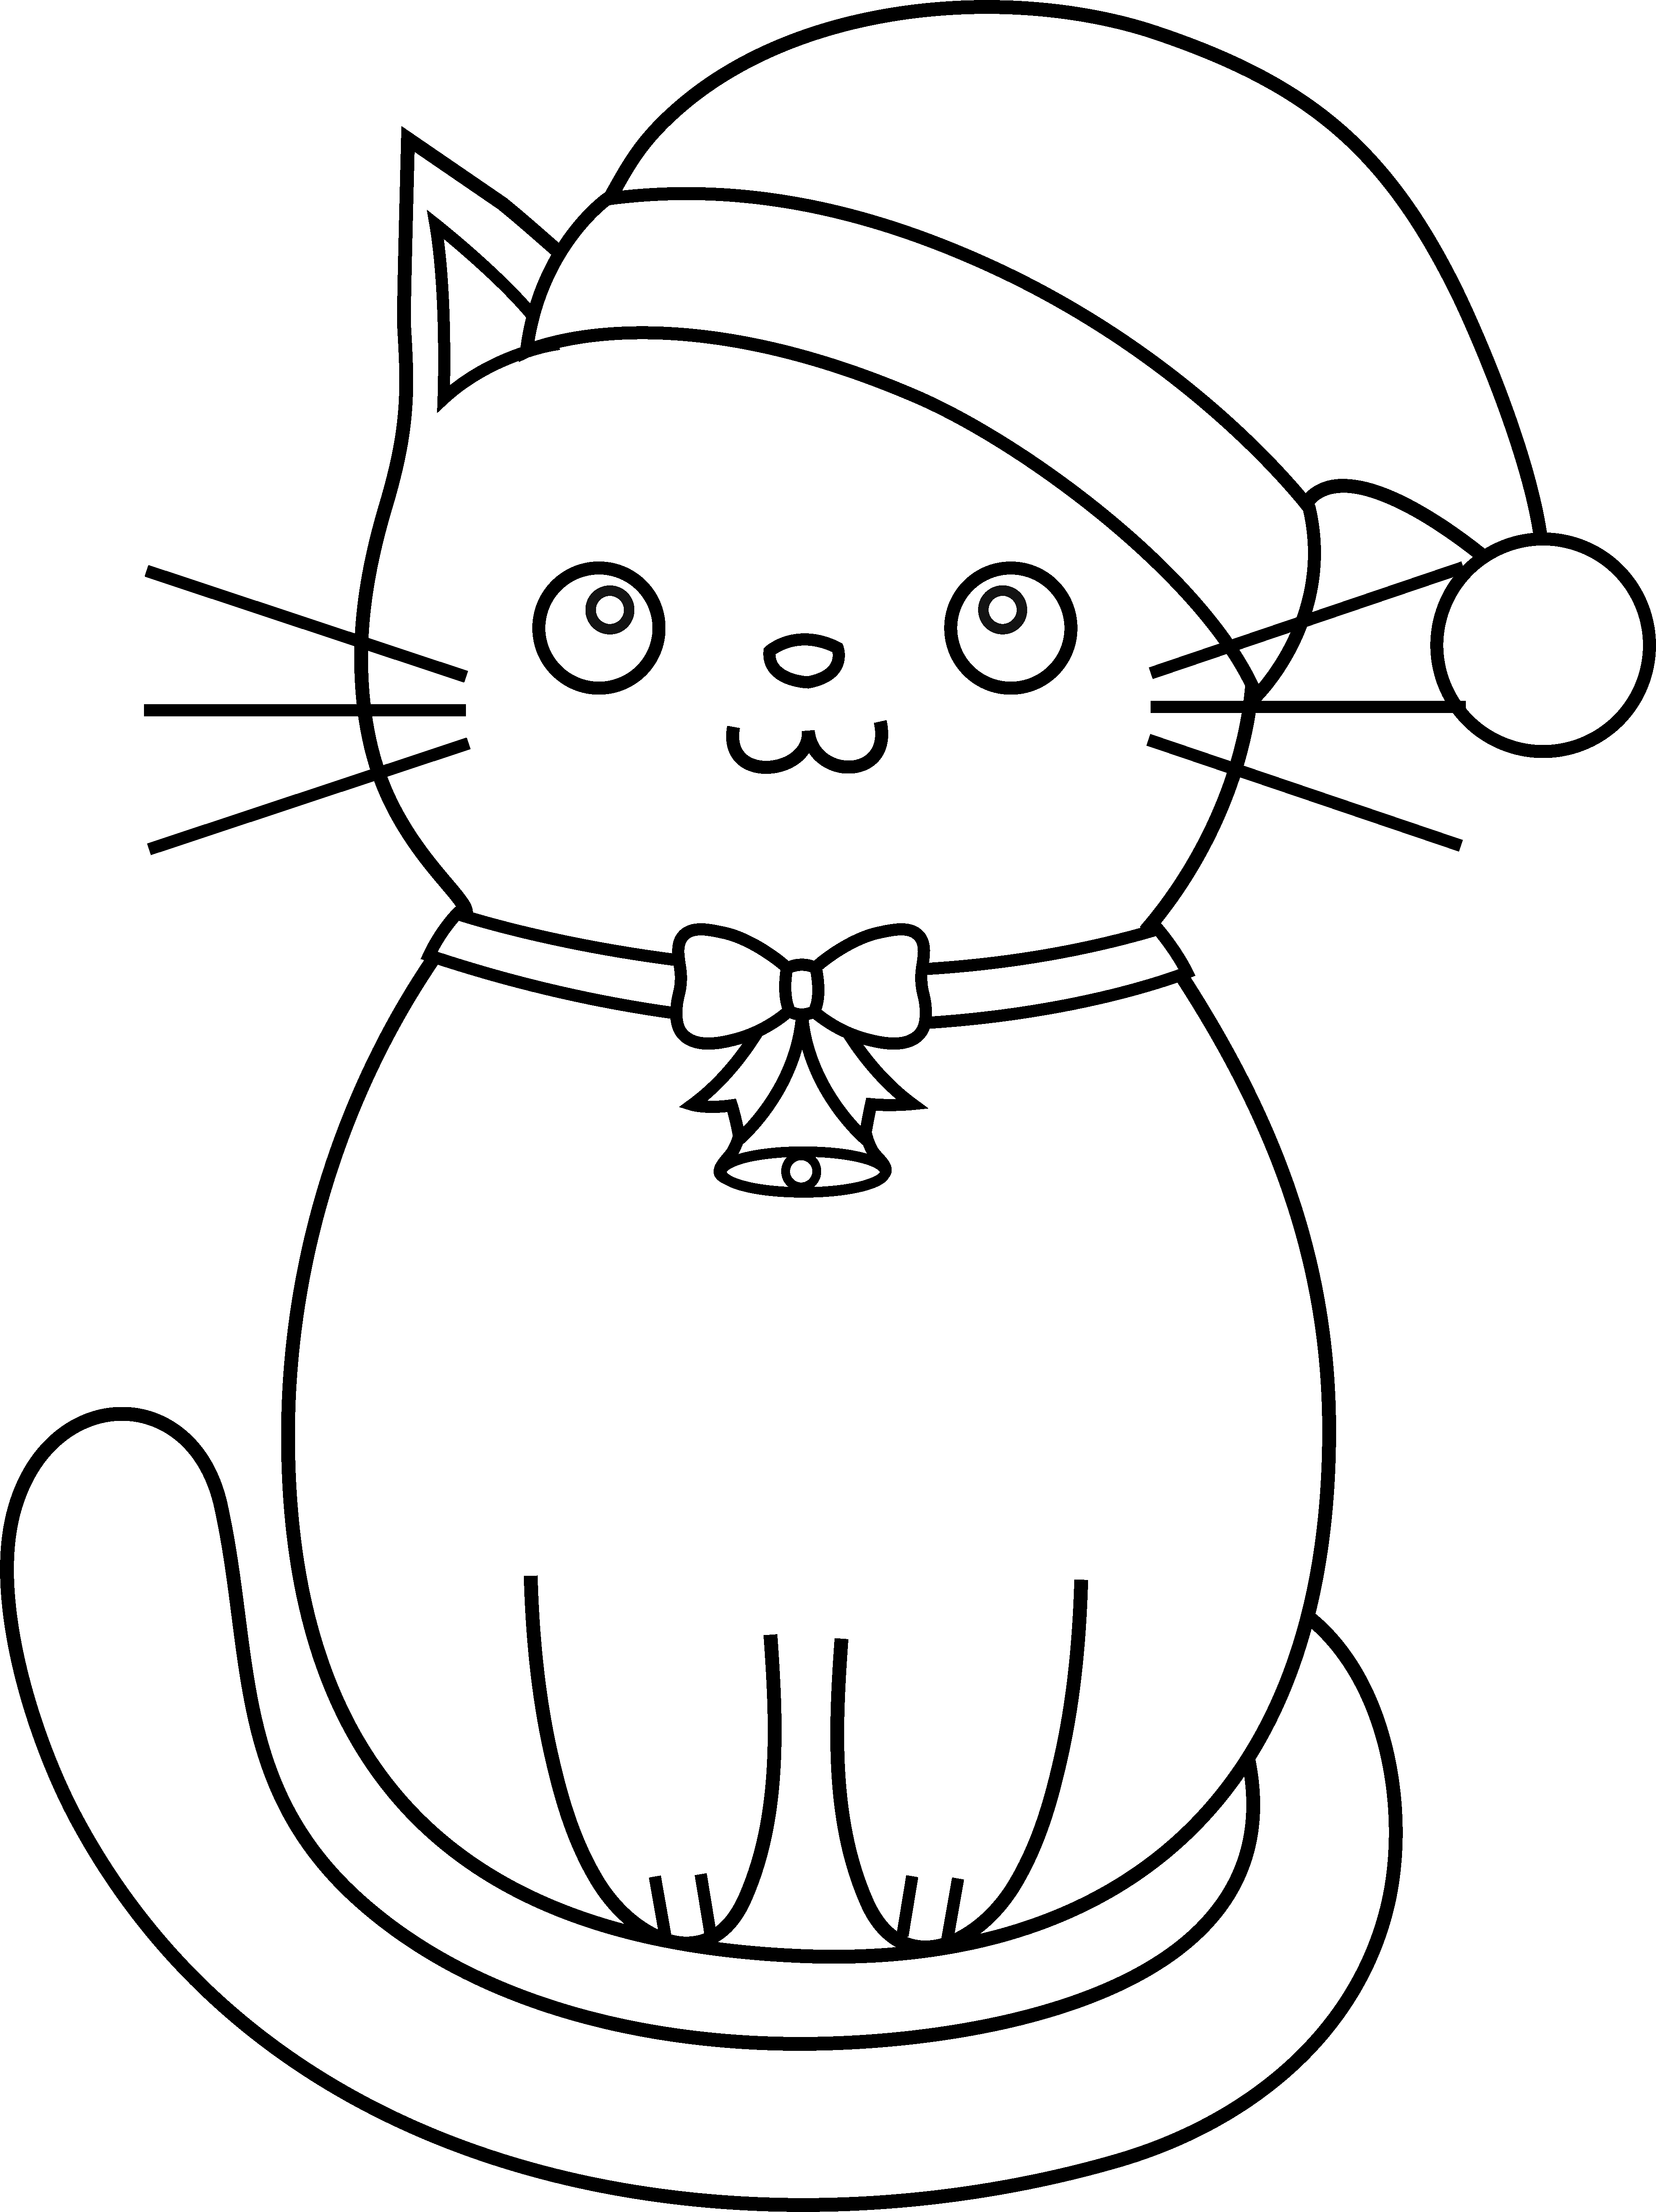 Kitten Coloring Pages Best Coloring Pages For Kids Coloring Wallpapers Download Free Images Wallpaper [coloring536.blogspot.com]